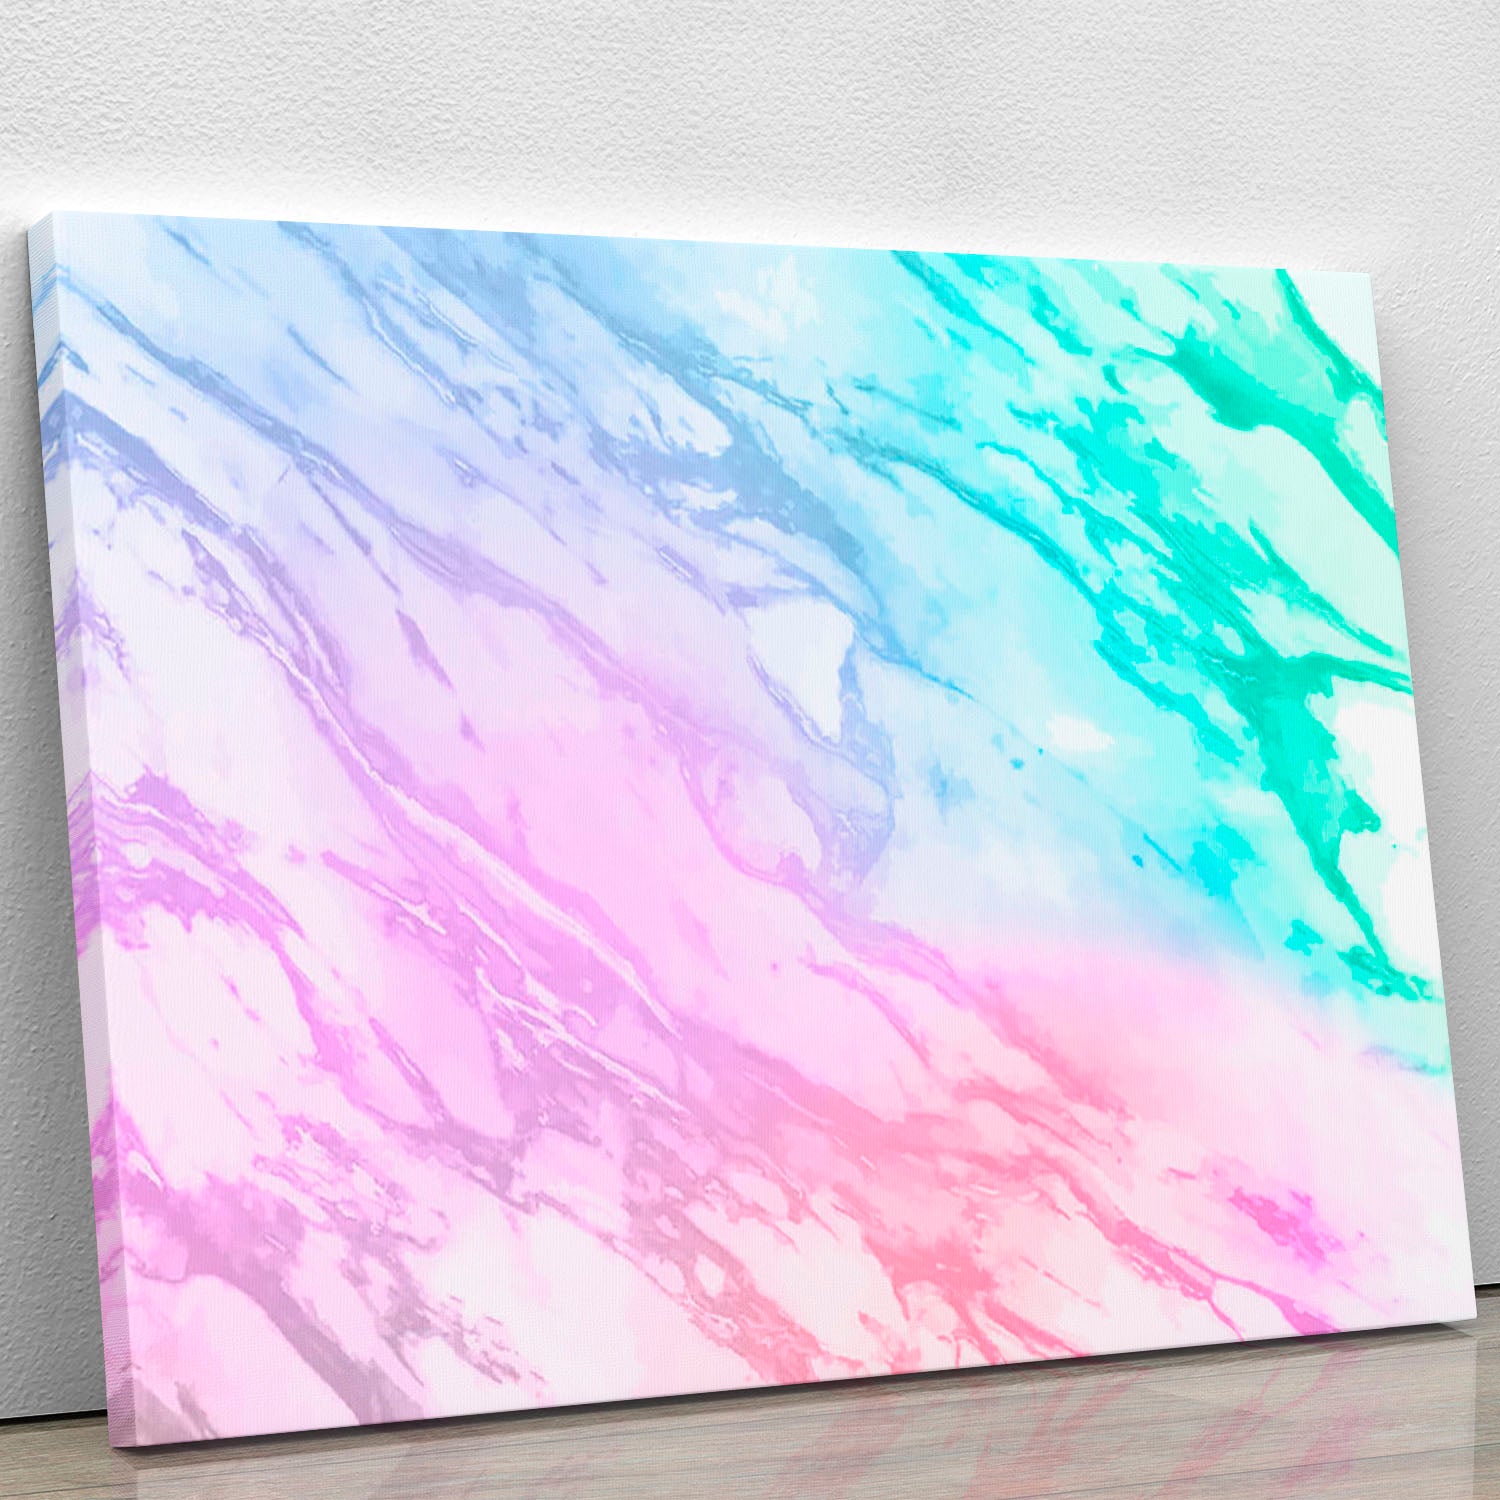 Neon Striped Marble Canvas Print or Poster - Canvas Art Rocks - 1